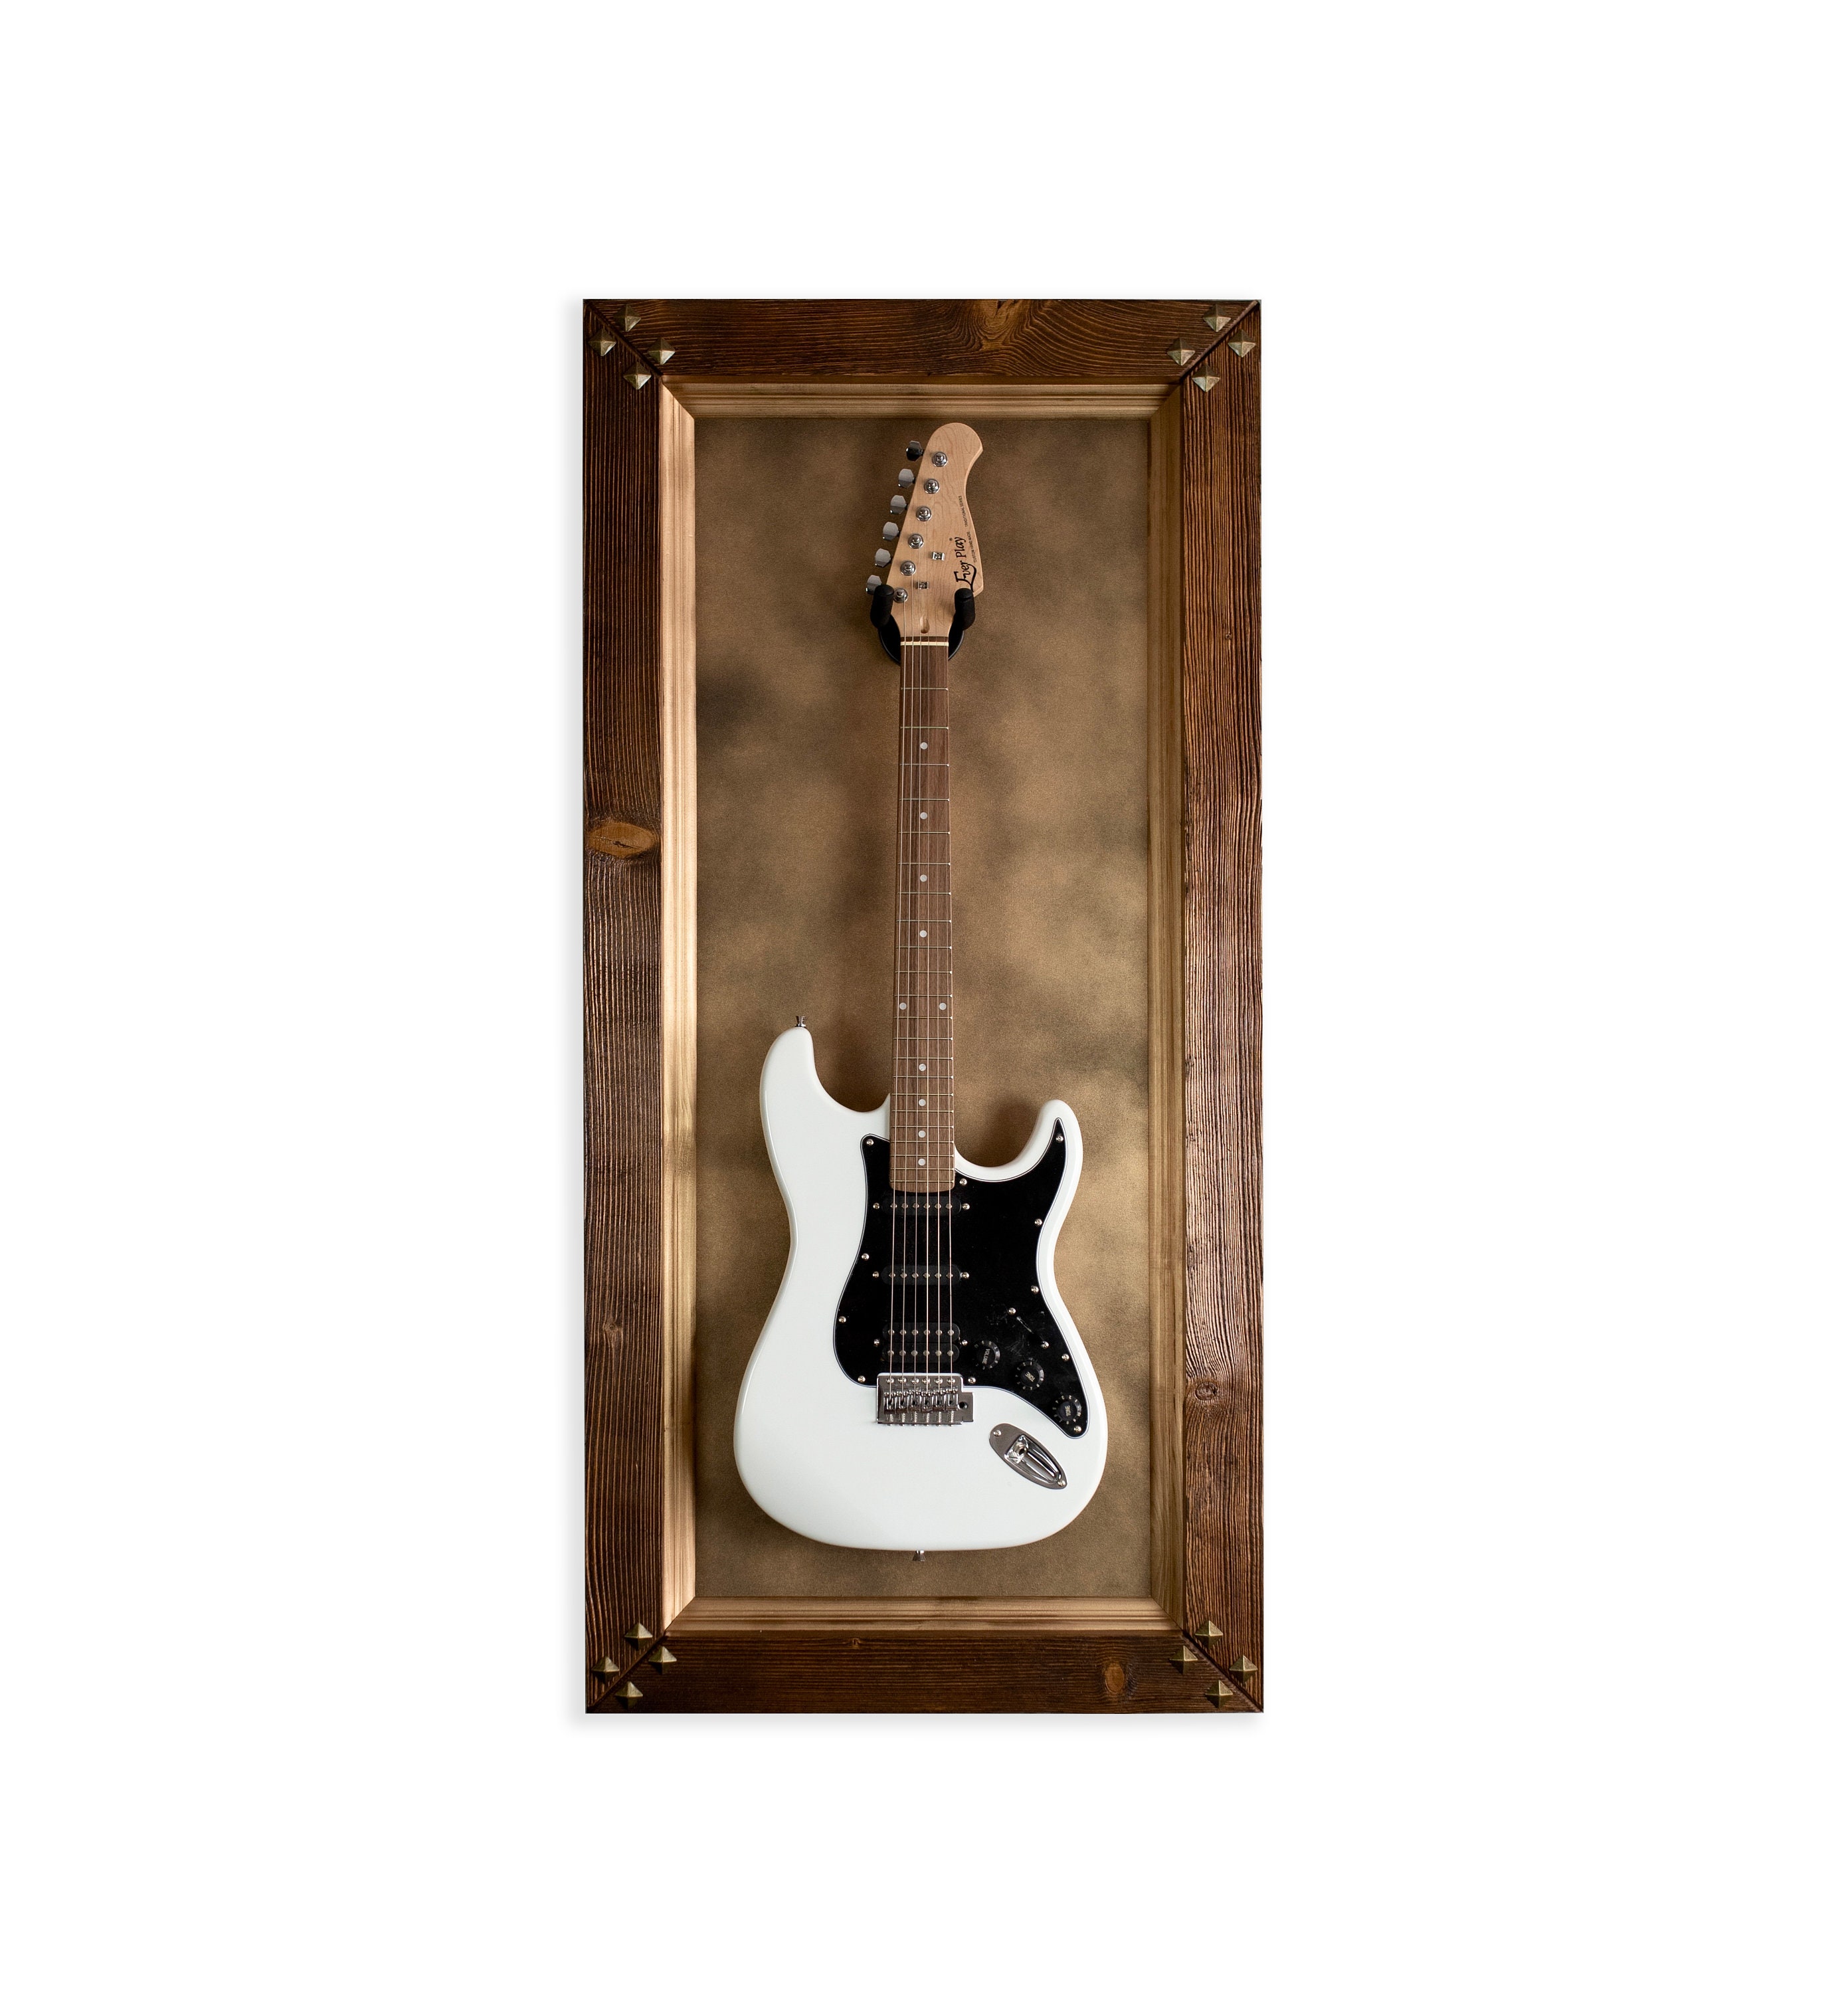 Guitar Frame Wall Display LED LIGHT Guitar Wall Mount Hanger GOLD  Background -  Canada